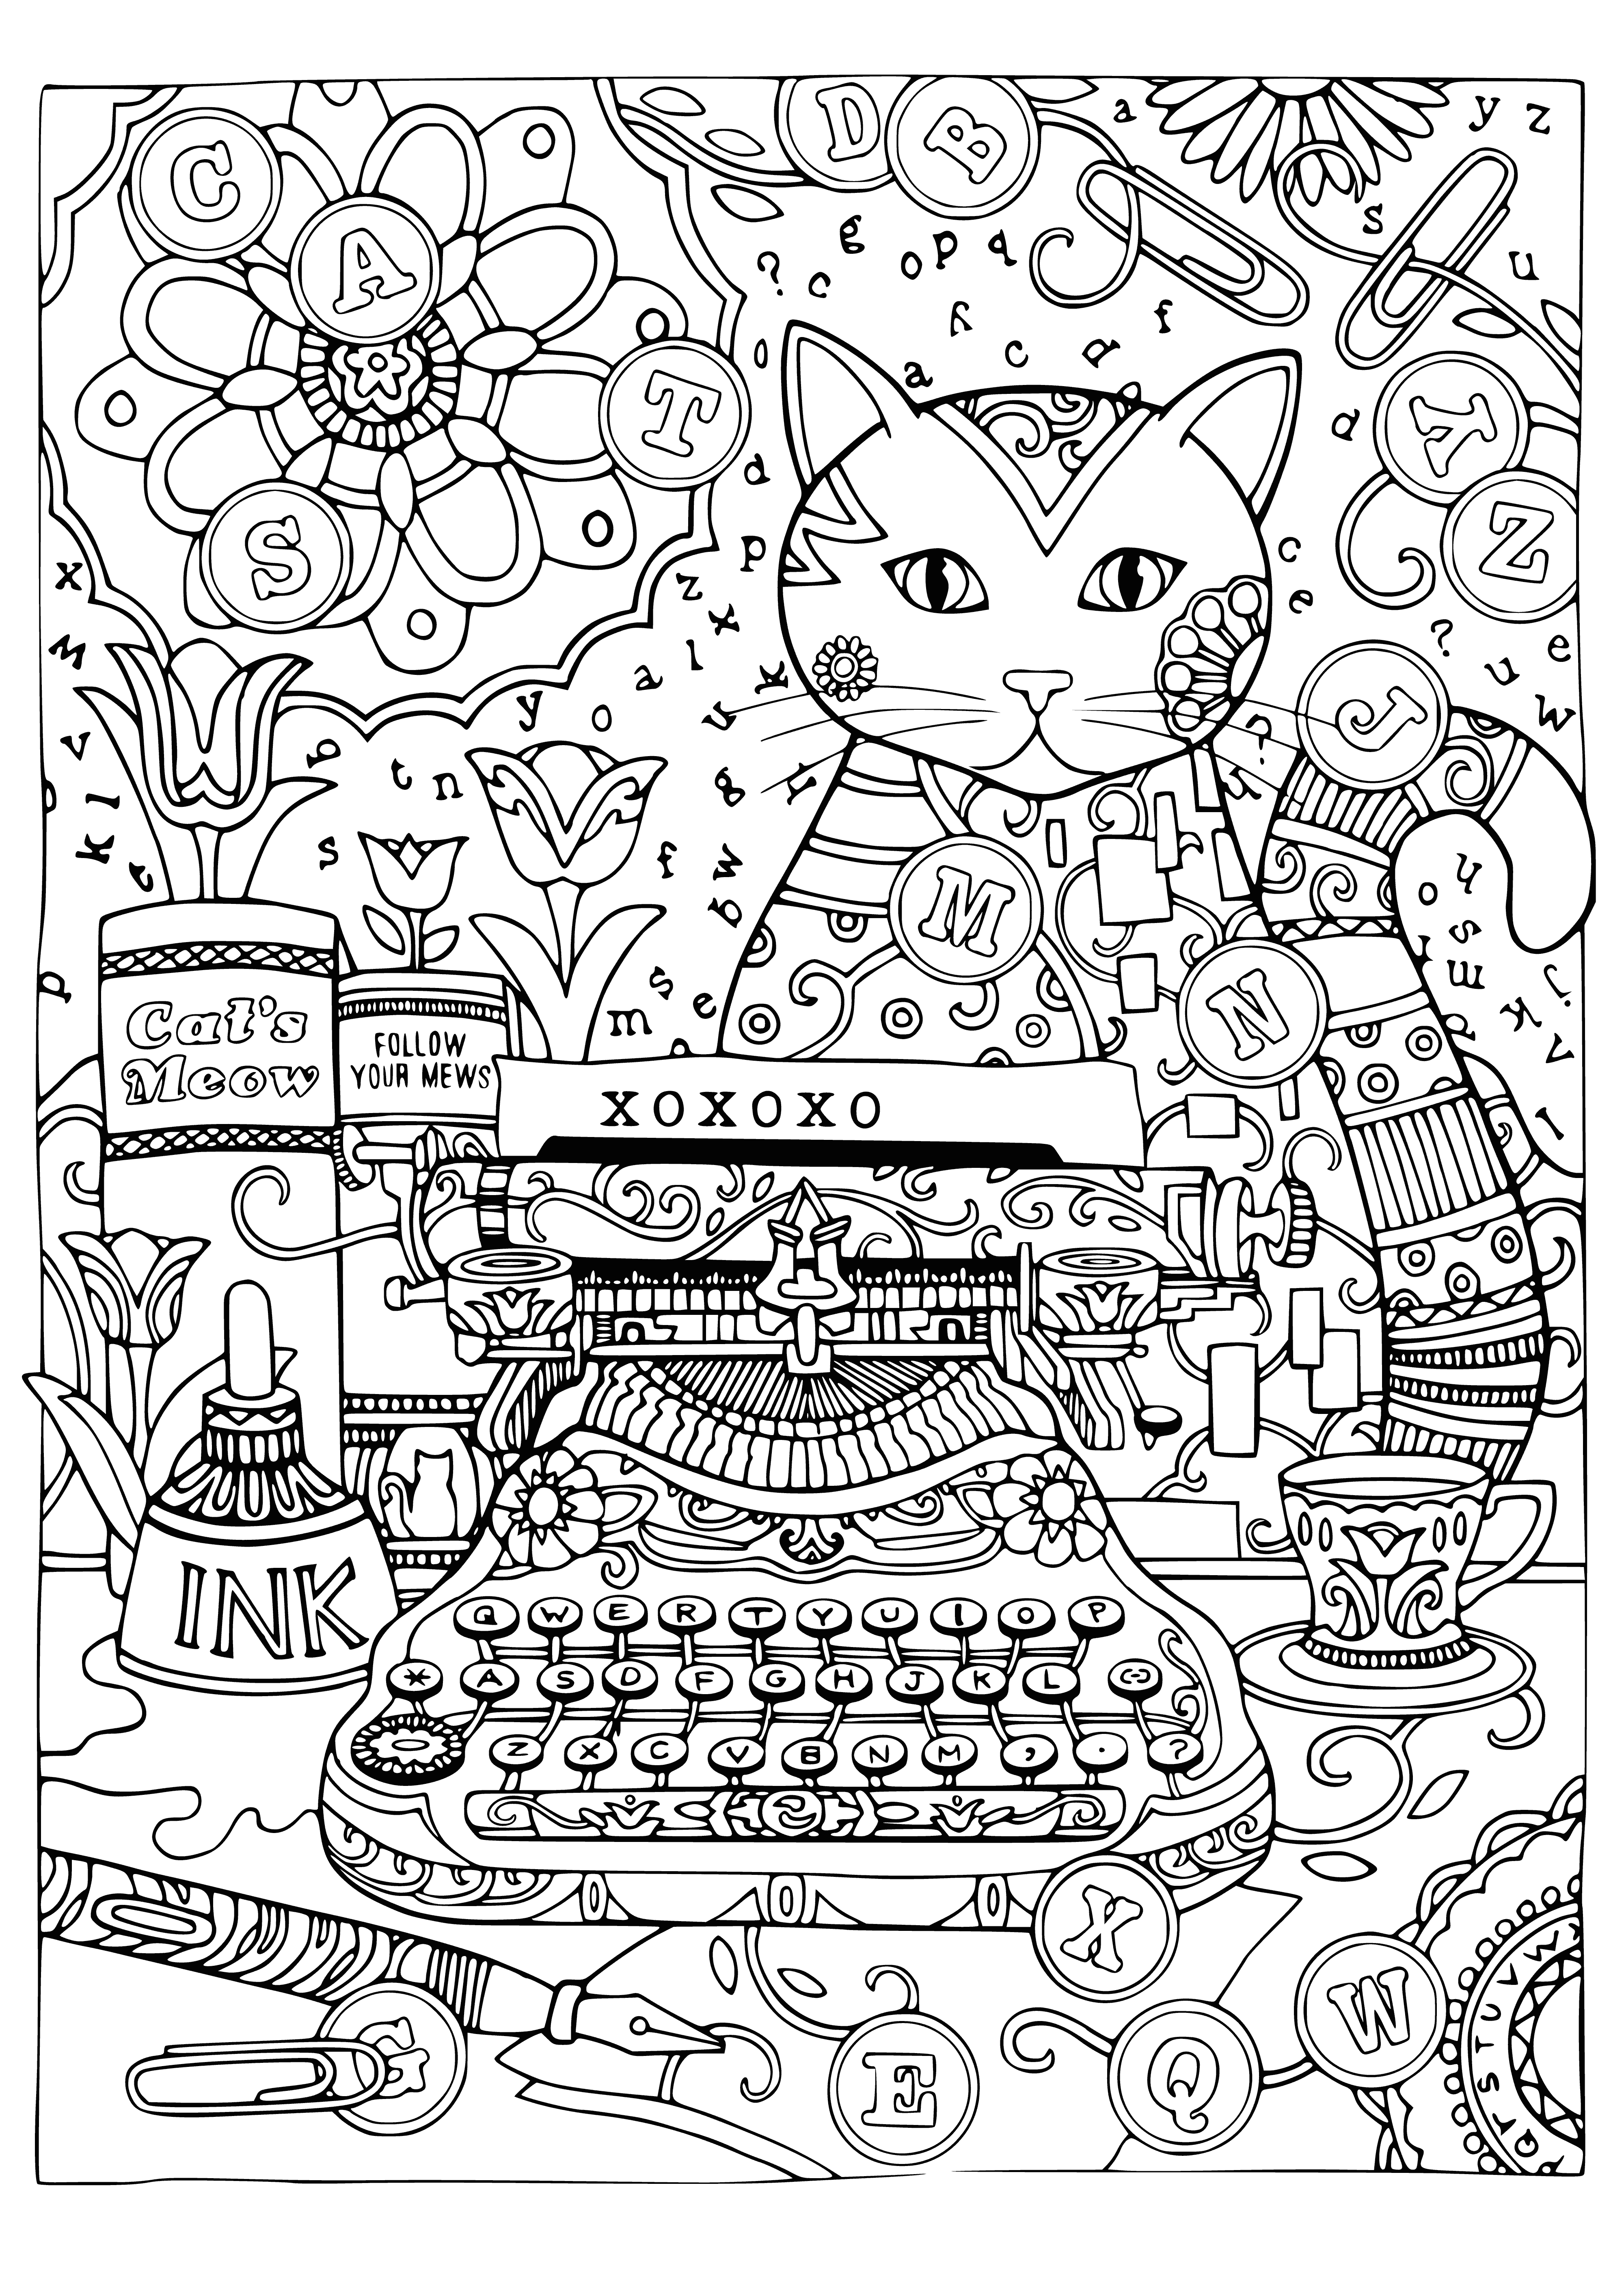 Cat at a typewriter coloring page